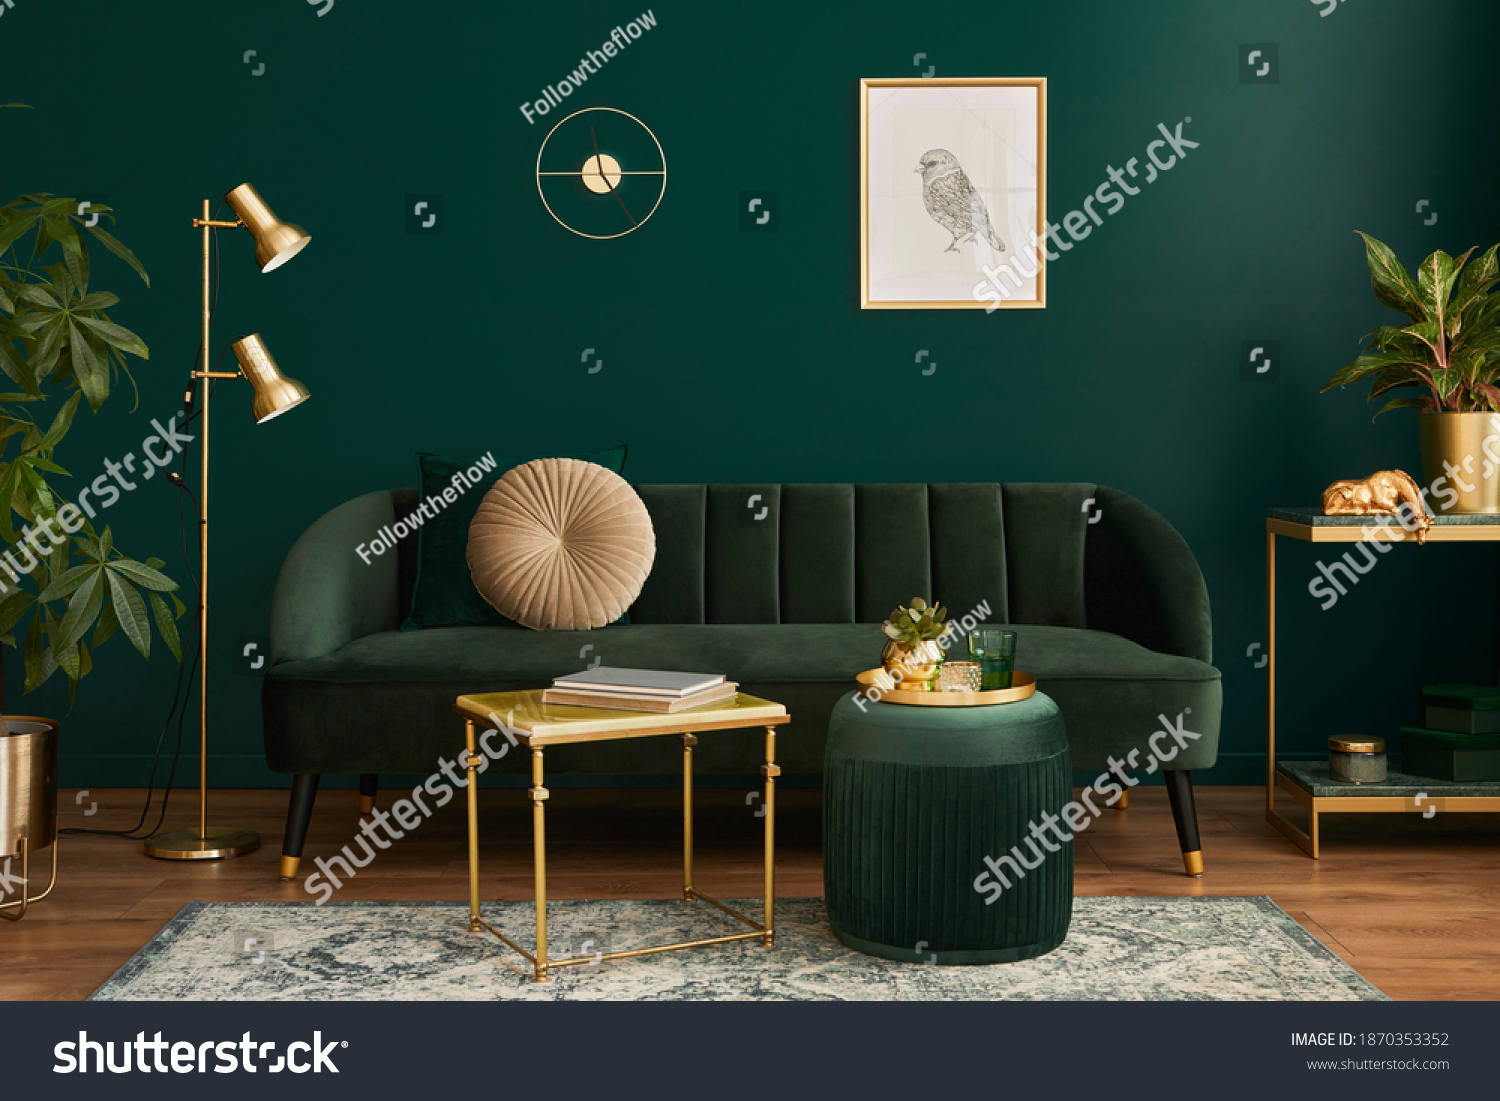 Luxury living room in house with modern interior design, green velvet sofa, coffee table, pouf, gold decoration, plant, lamp, carpet, mock up poster frame and elegant accessories. Template.  #1870353352